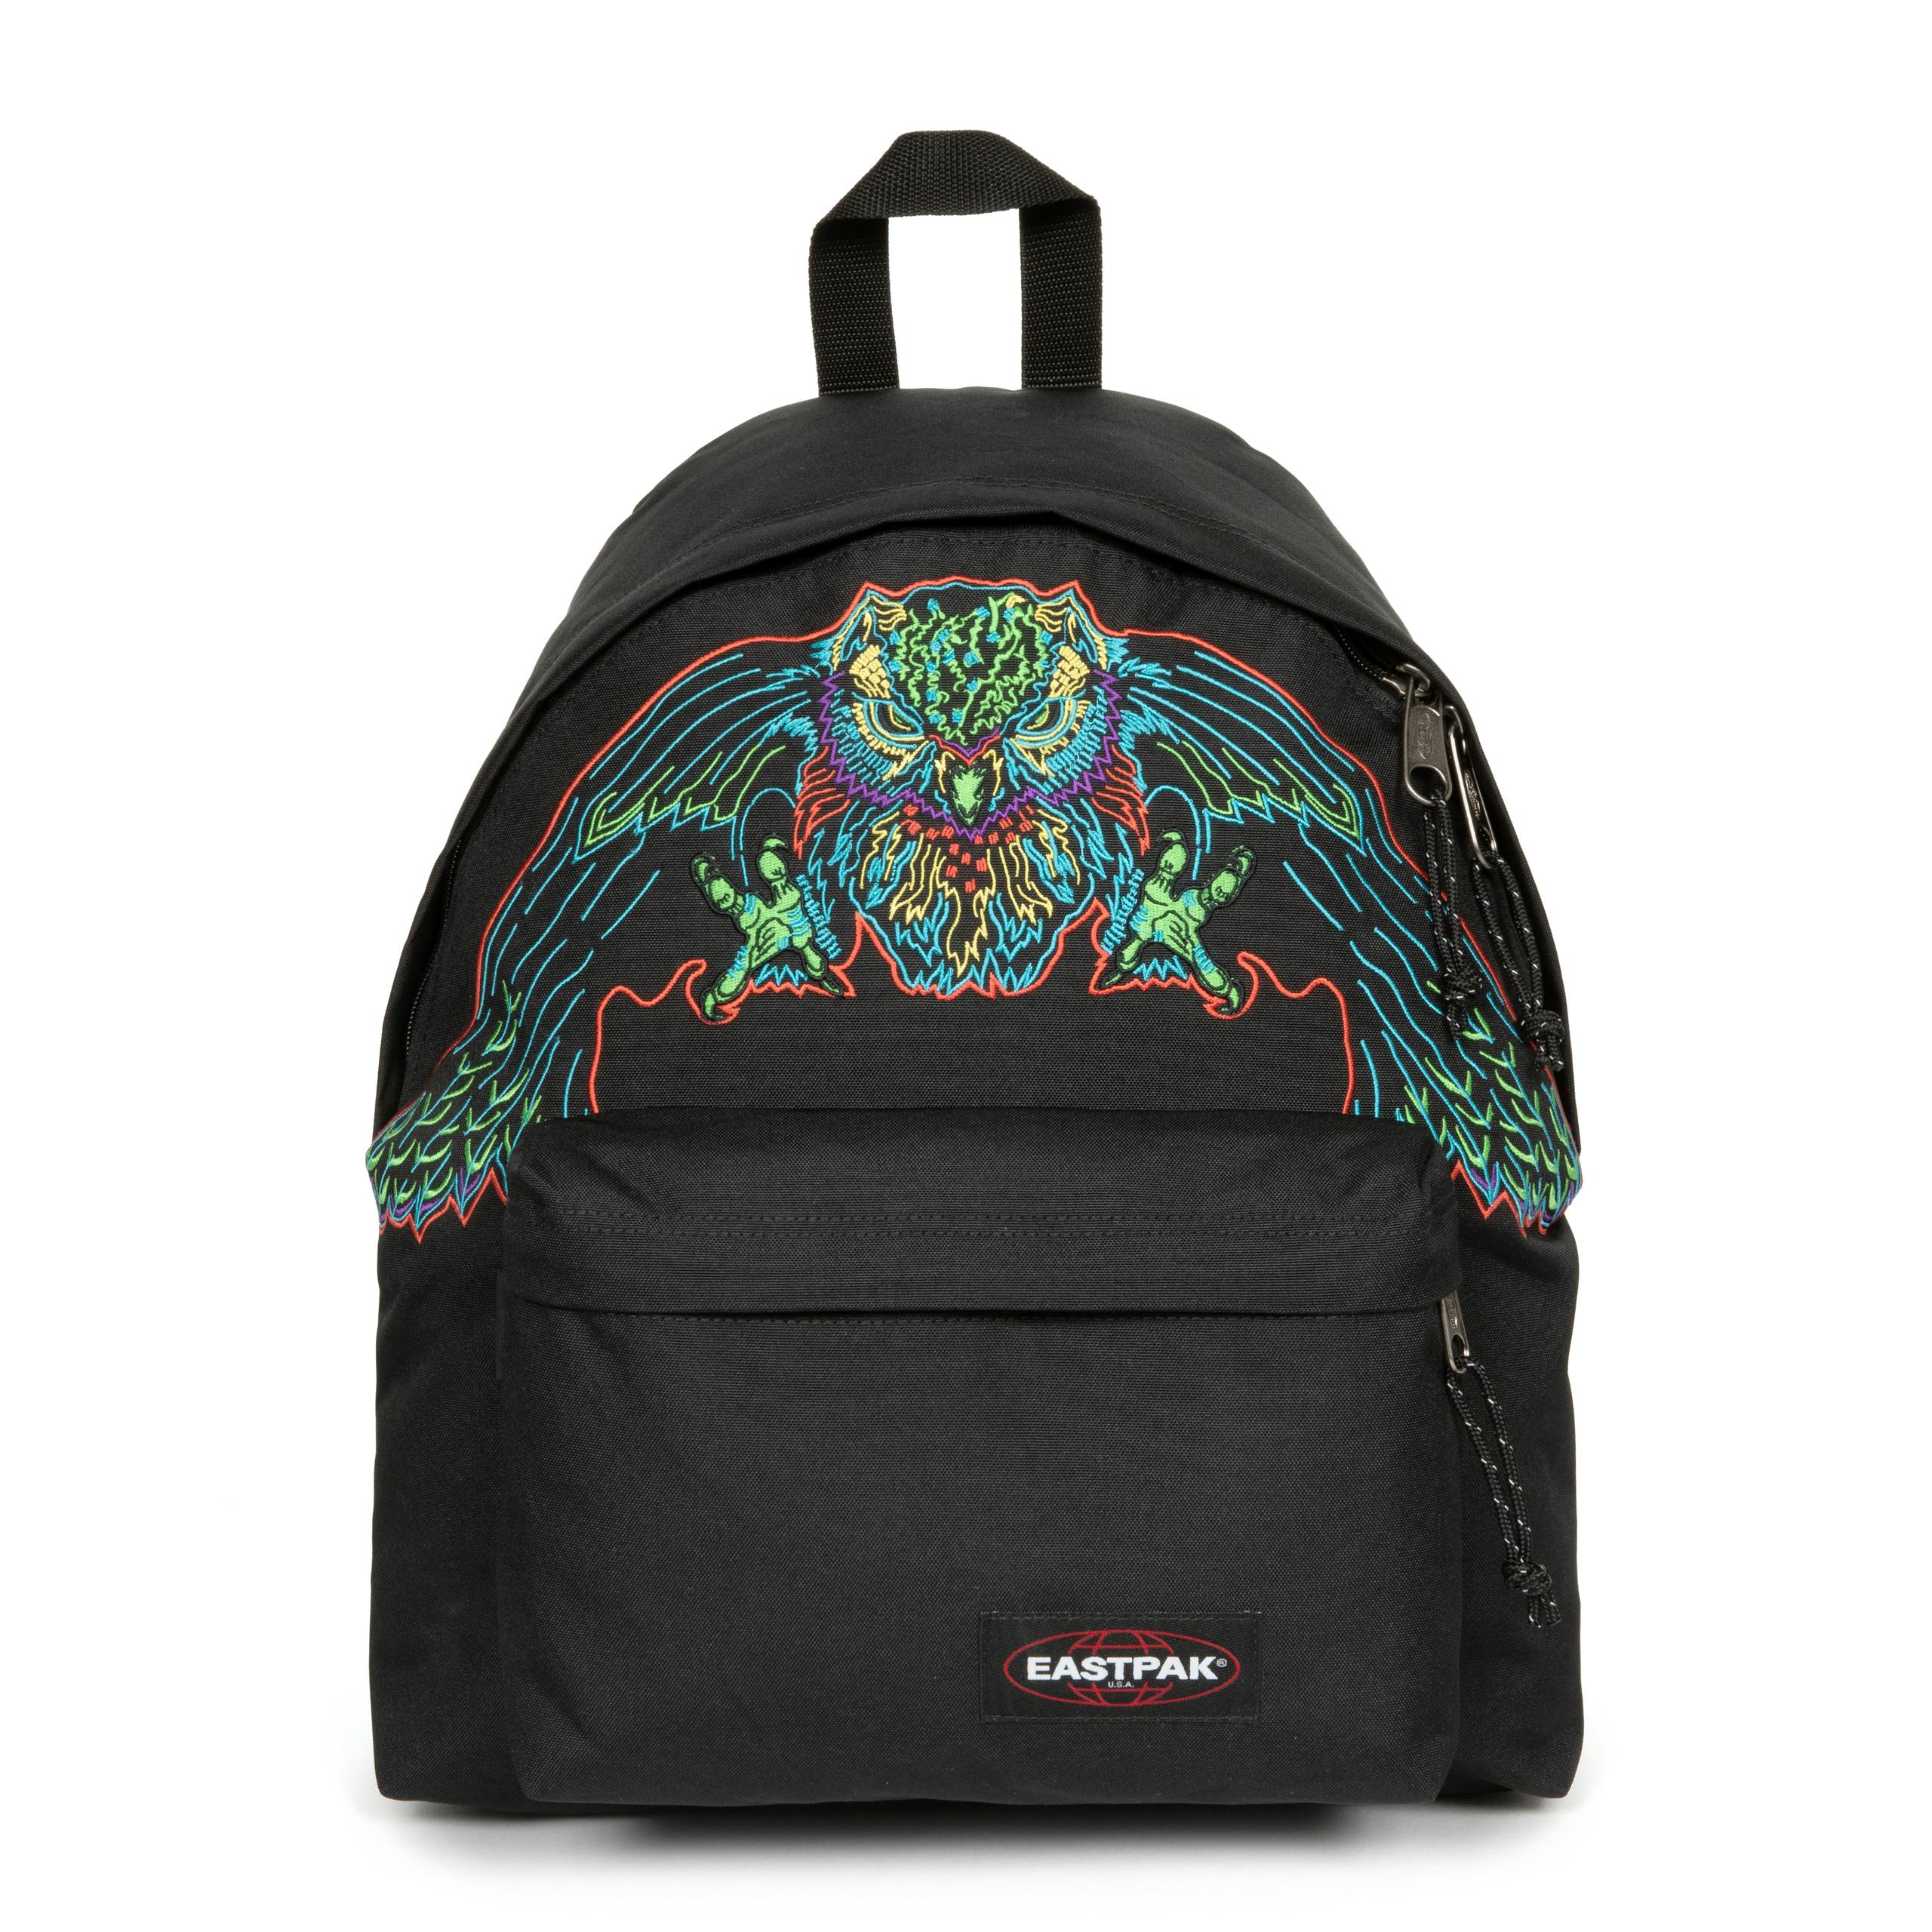 EASTPAK SAC À DOS PADDED PAK'R NEON EMBROIDED